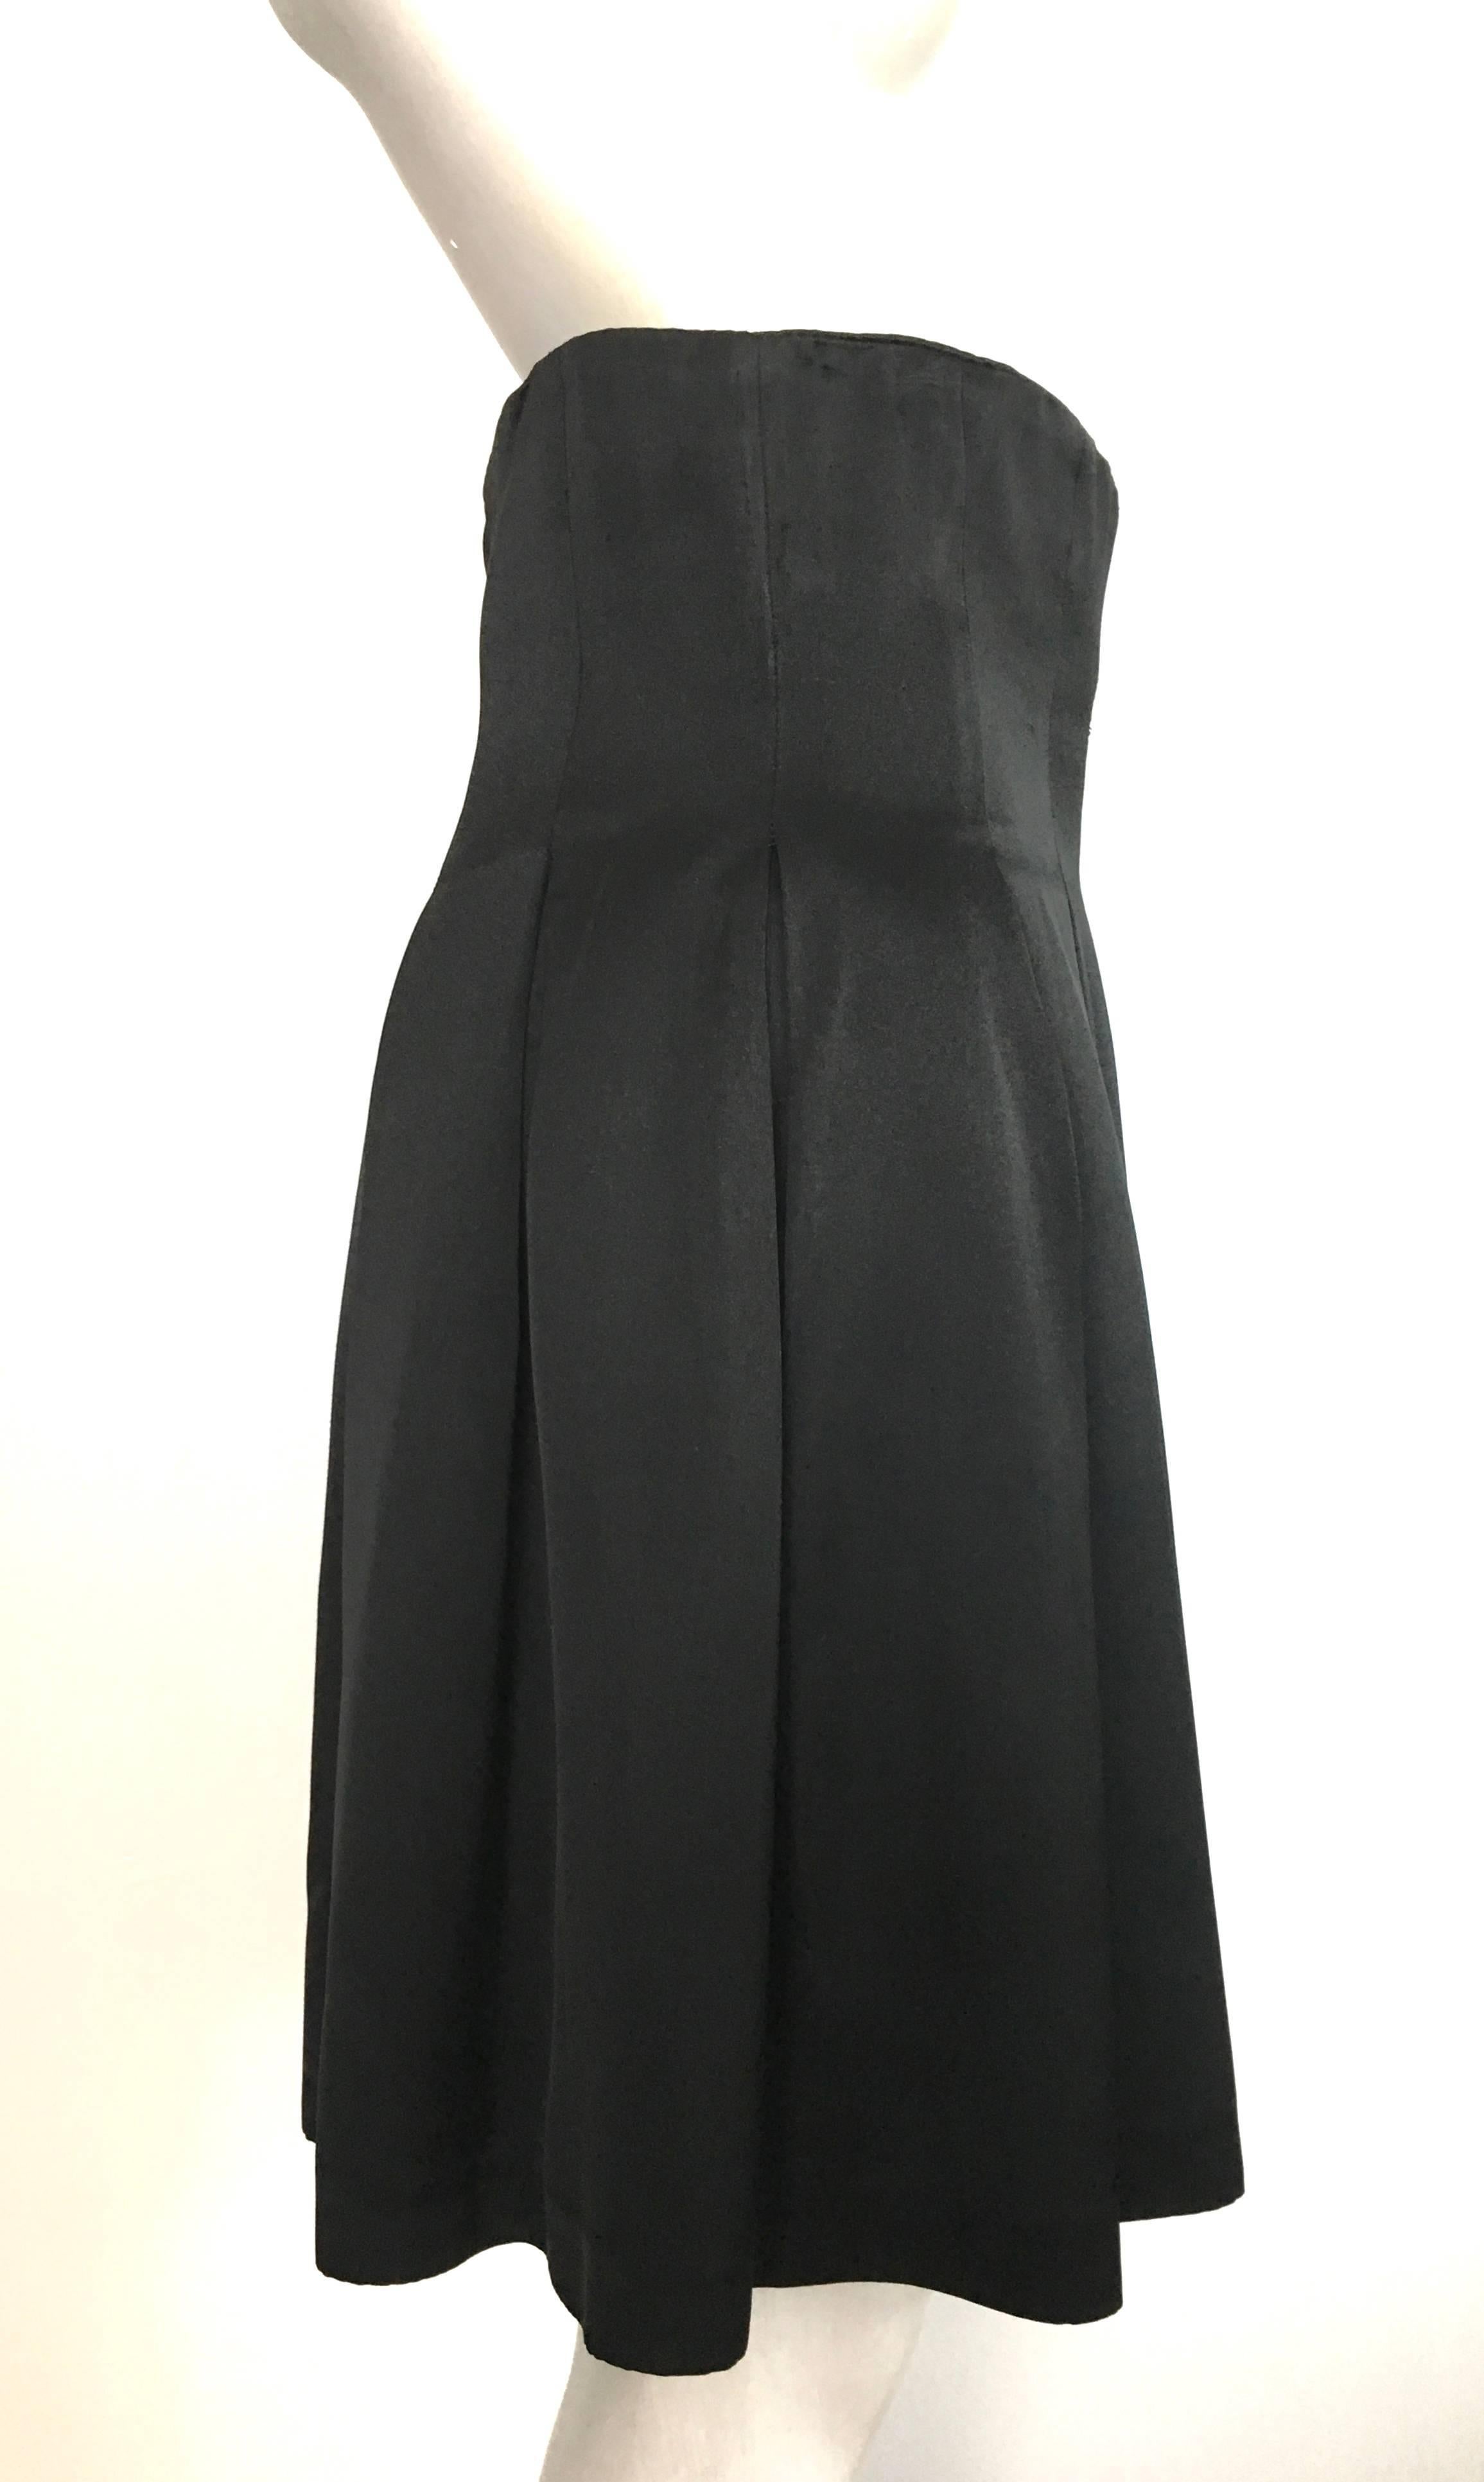 Patrick Kelly Paris 1980s Black Pleated Skirt Size 6. In Excellent Condition For Sale In Atlanta, GA